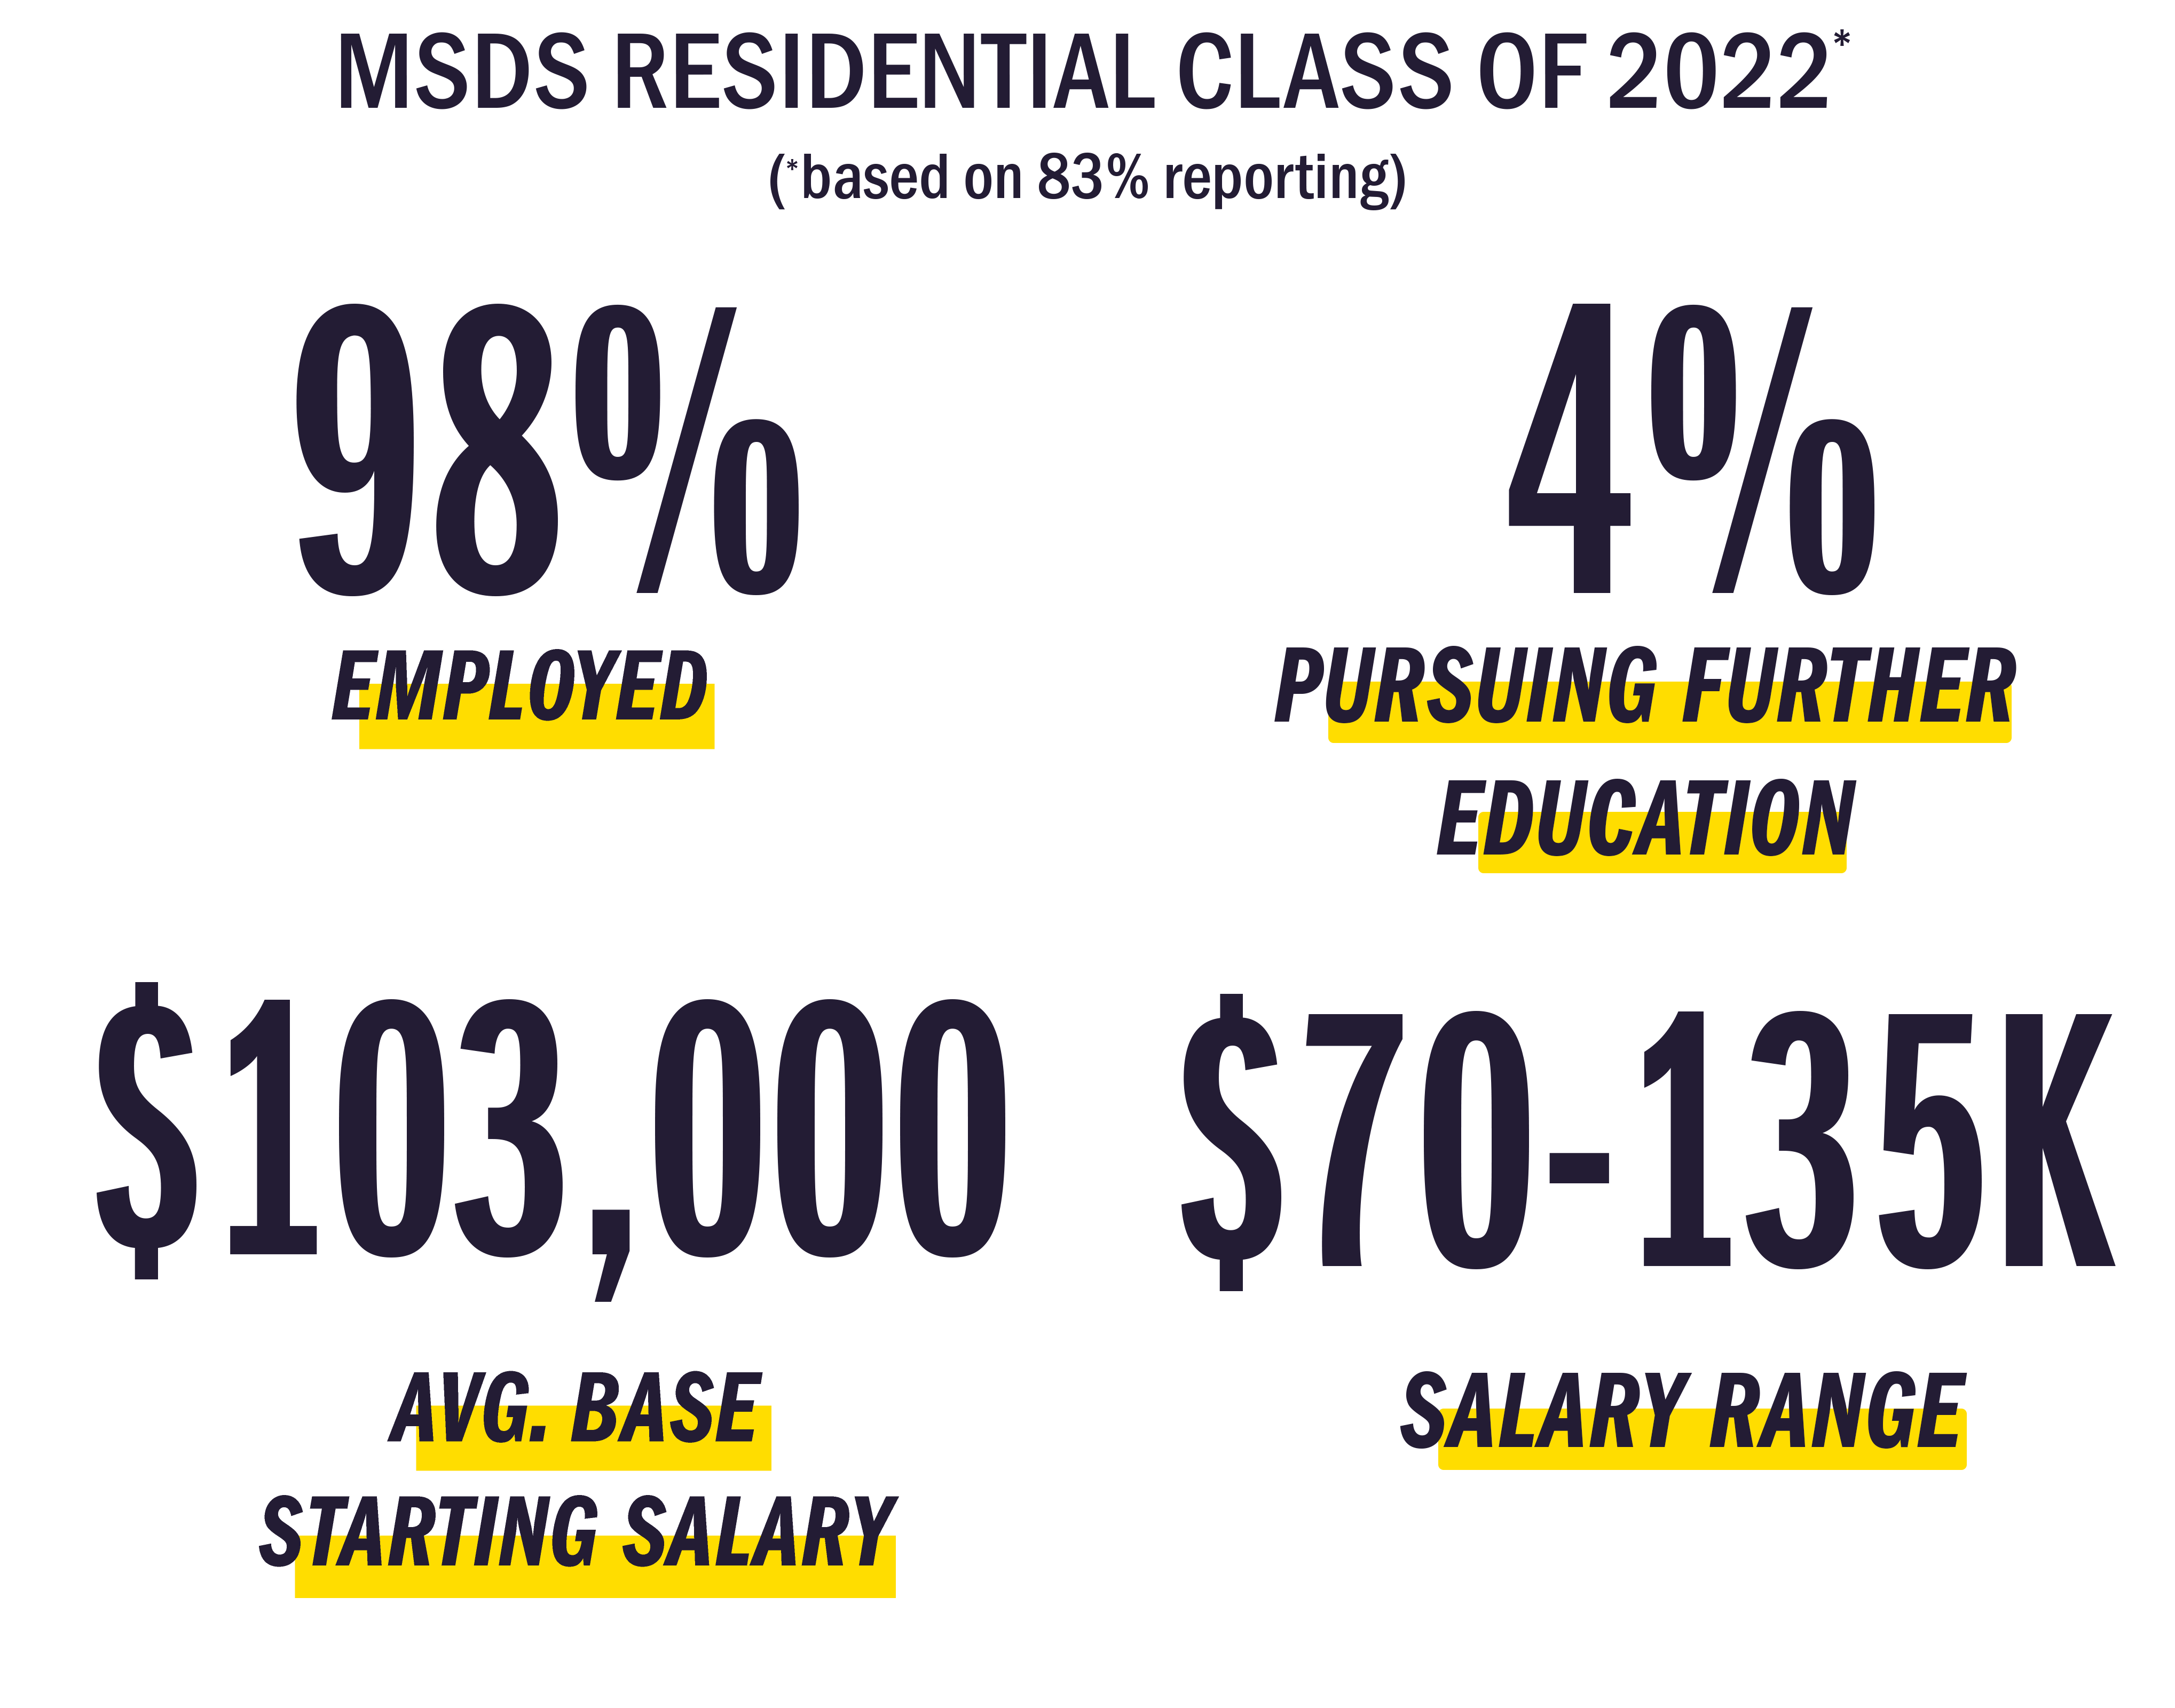 Employment statistics for MSDS Residential Class of 2022